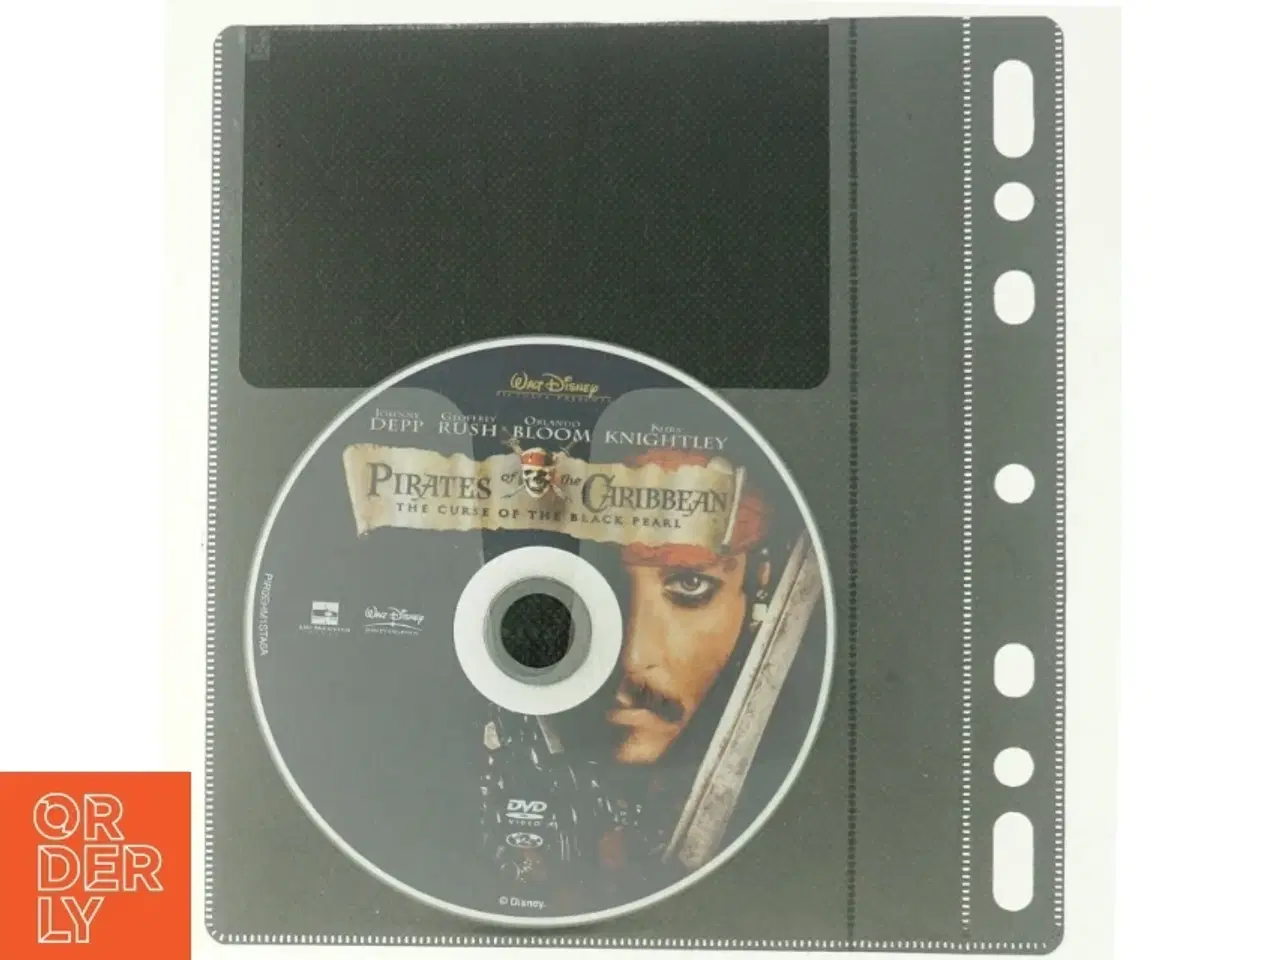 Billede 3 - Pirates of the Caribbean 1